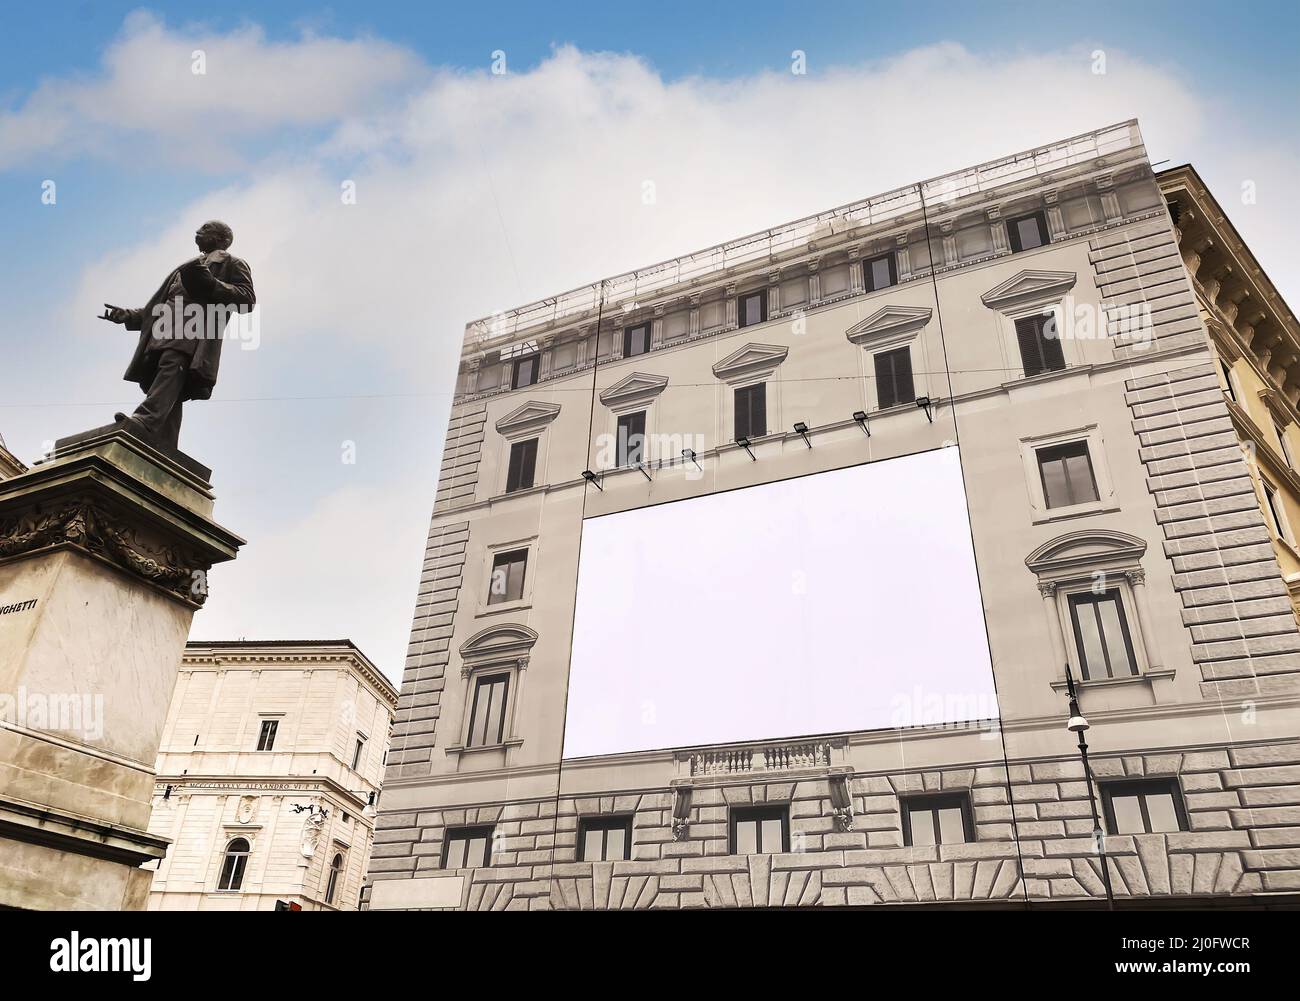 Blank advertising billboard on the scaffolding of the facade of an ancient building under restoratio Stock Photo